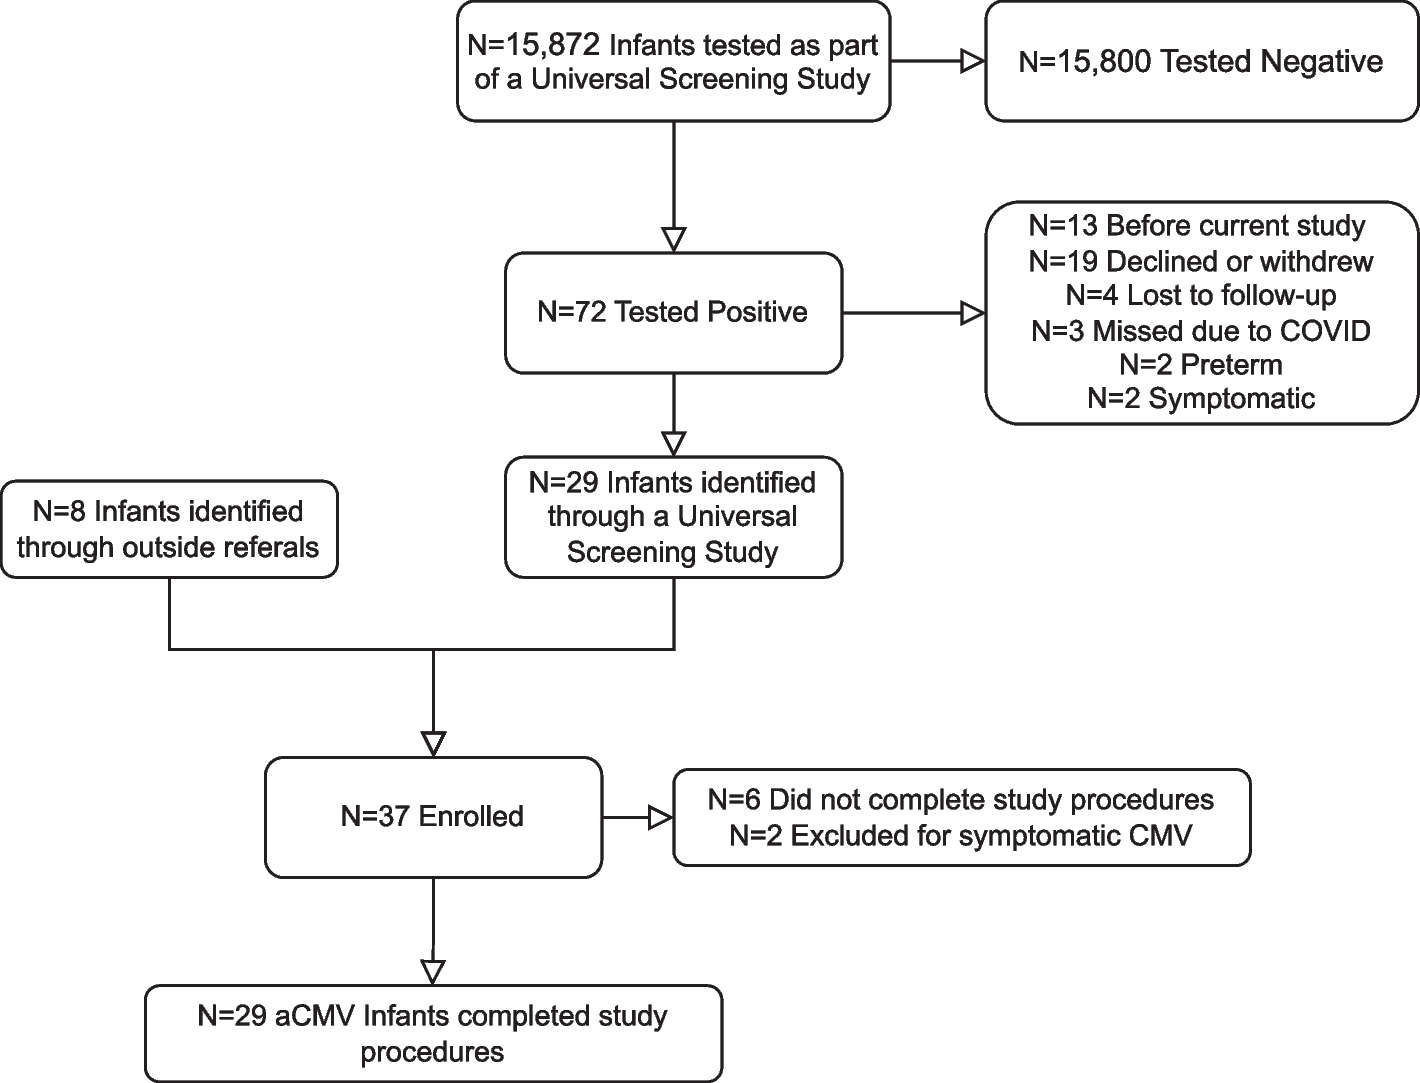 Neurobehavioral outcomes of neonatal asymptomatic congenital cytomegalovirus infection at 12-months